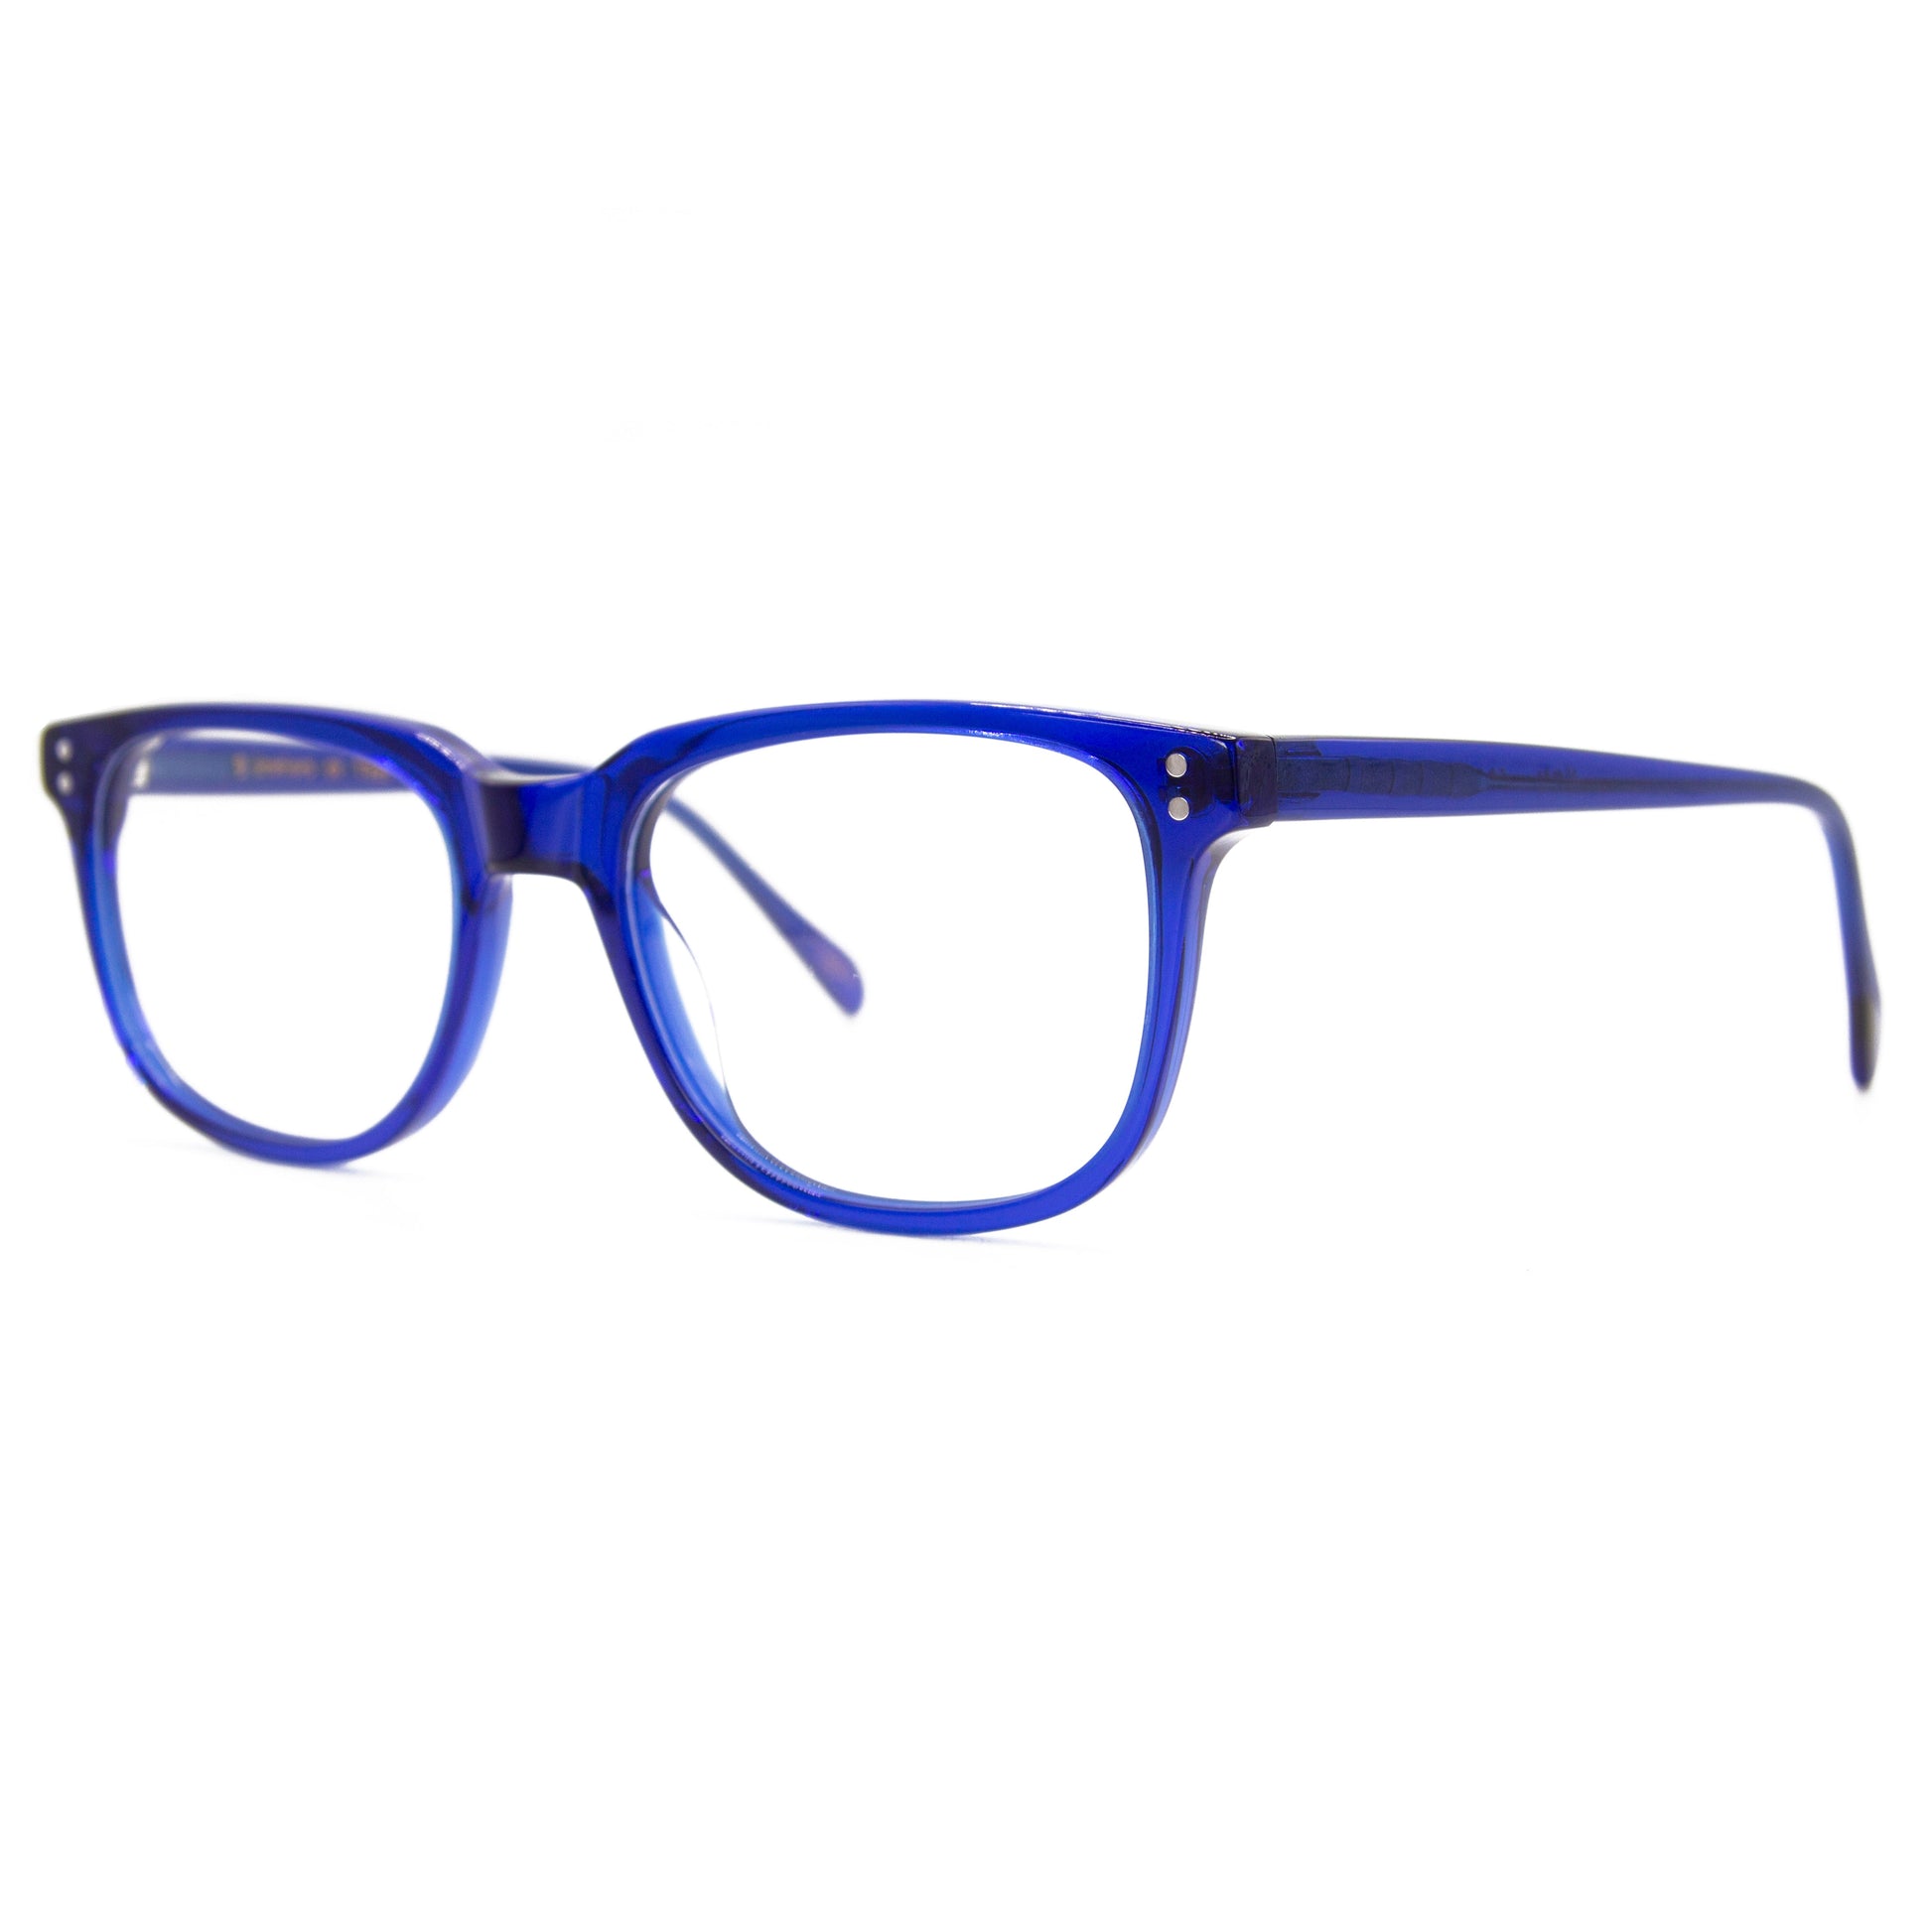 3 brothers - Theo - Navy - Prescription Glasses - Side